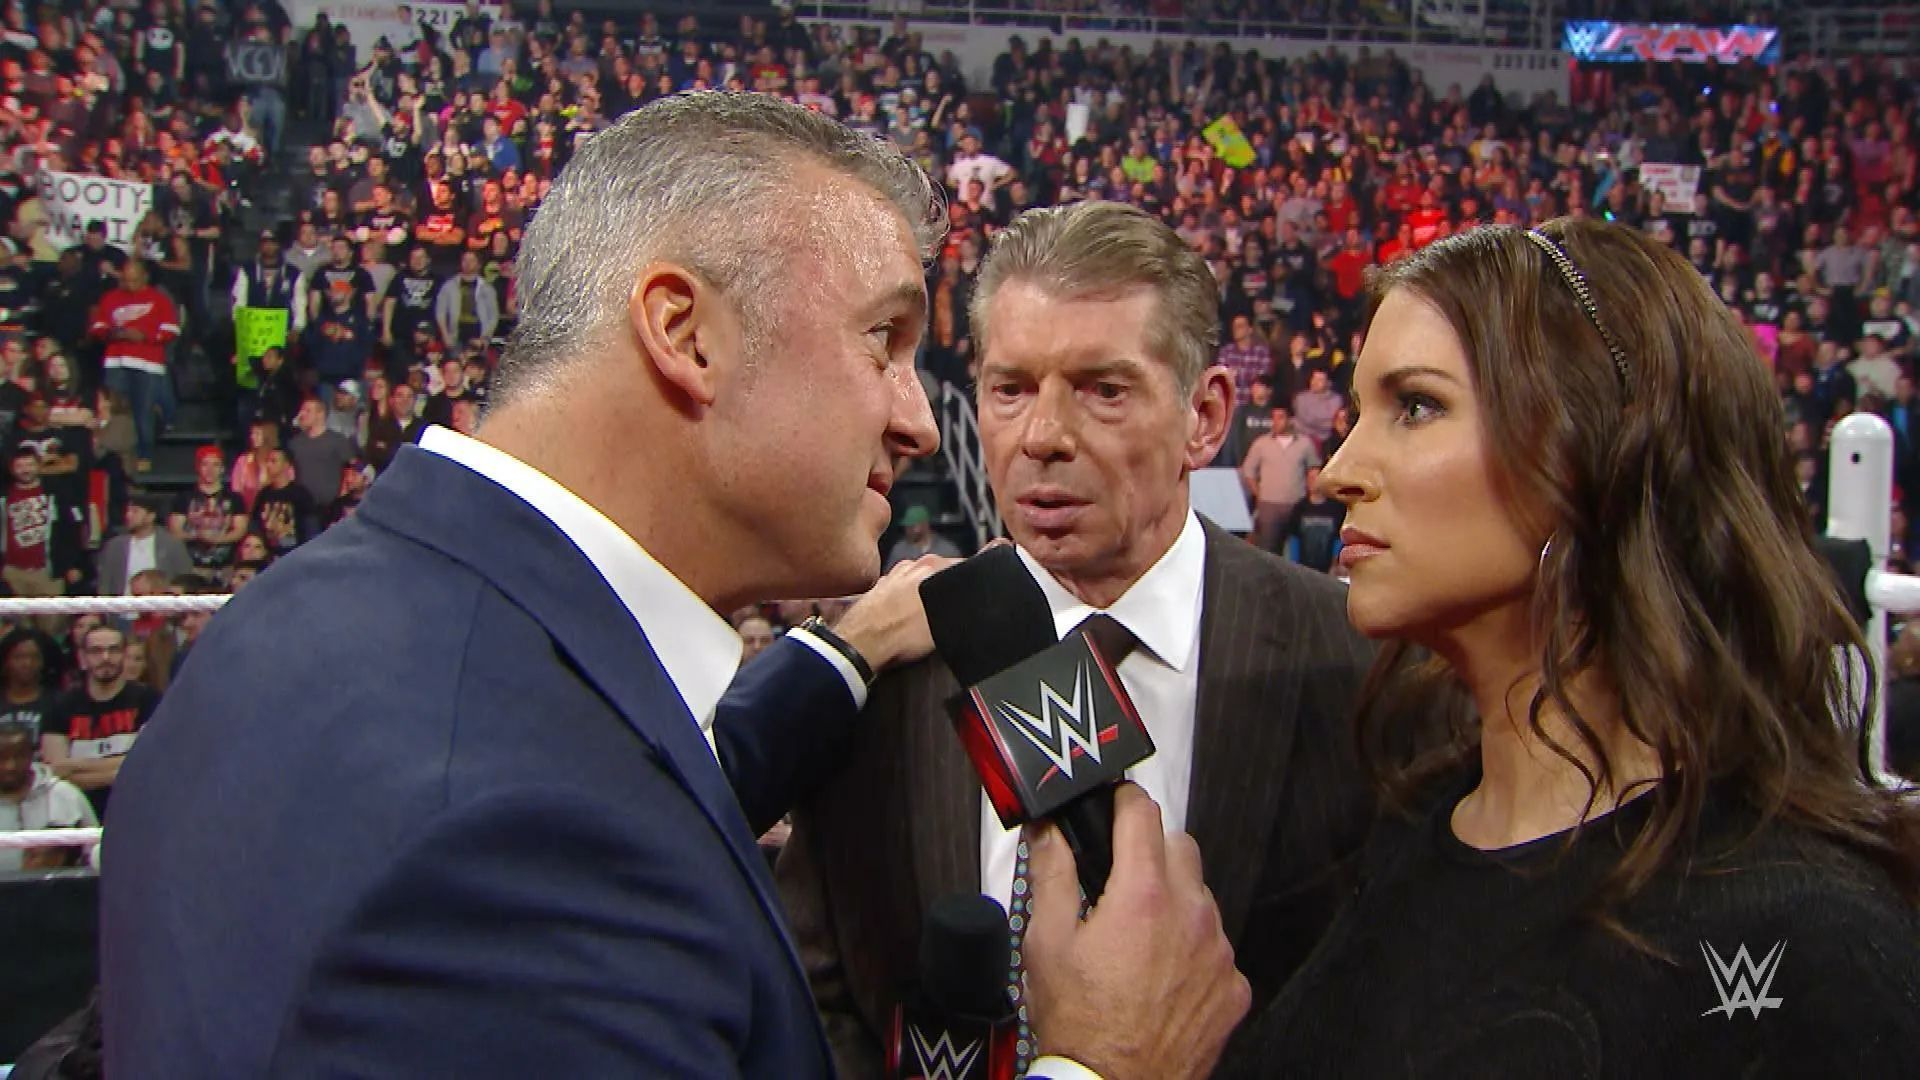 The McMahon Family dynamics have always been contentious